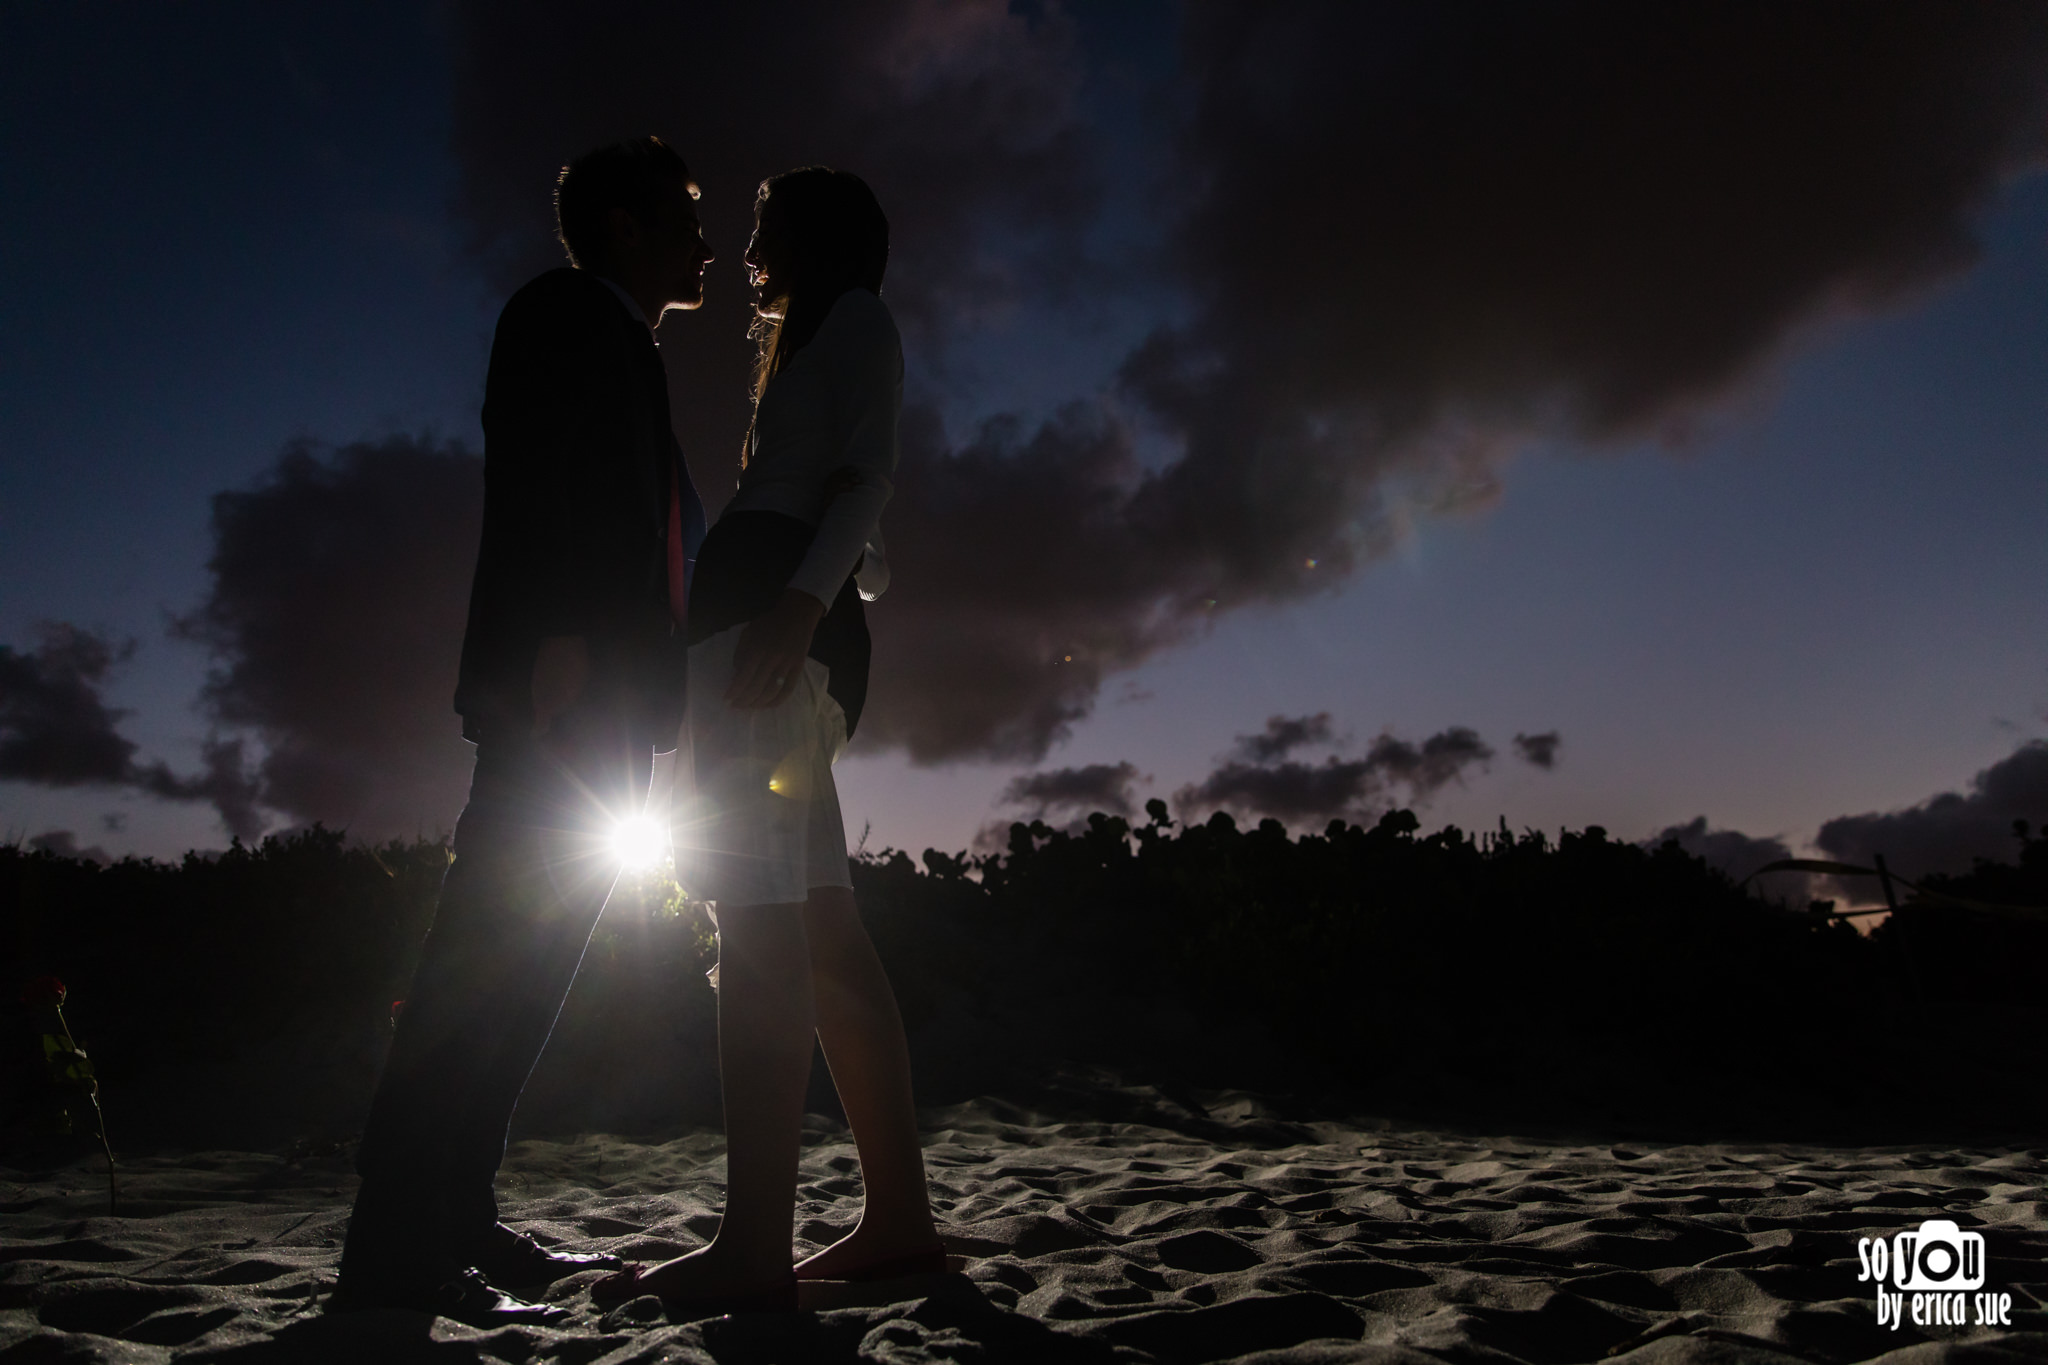 so-you-by-erica-sue-hollywood-fl-photographer-beach-engagement-flowers-candles-5342.jpg